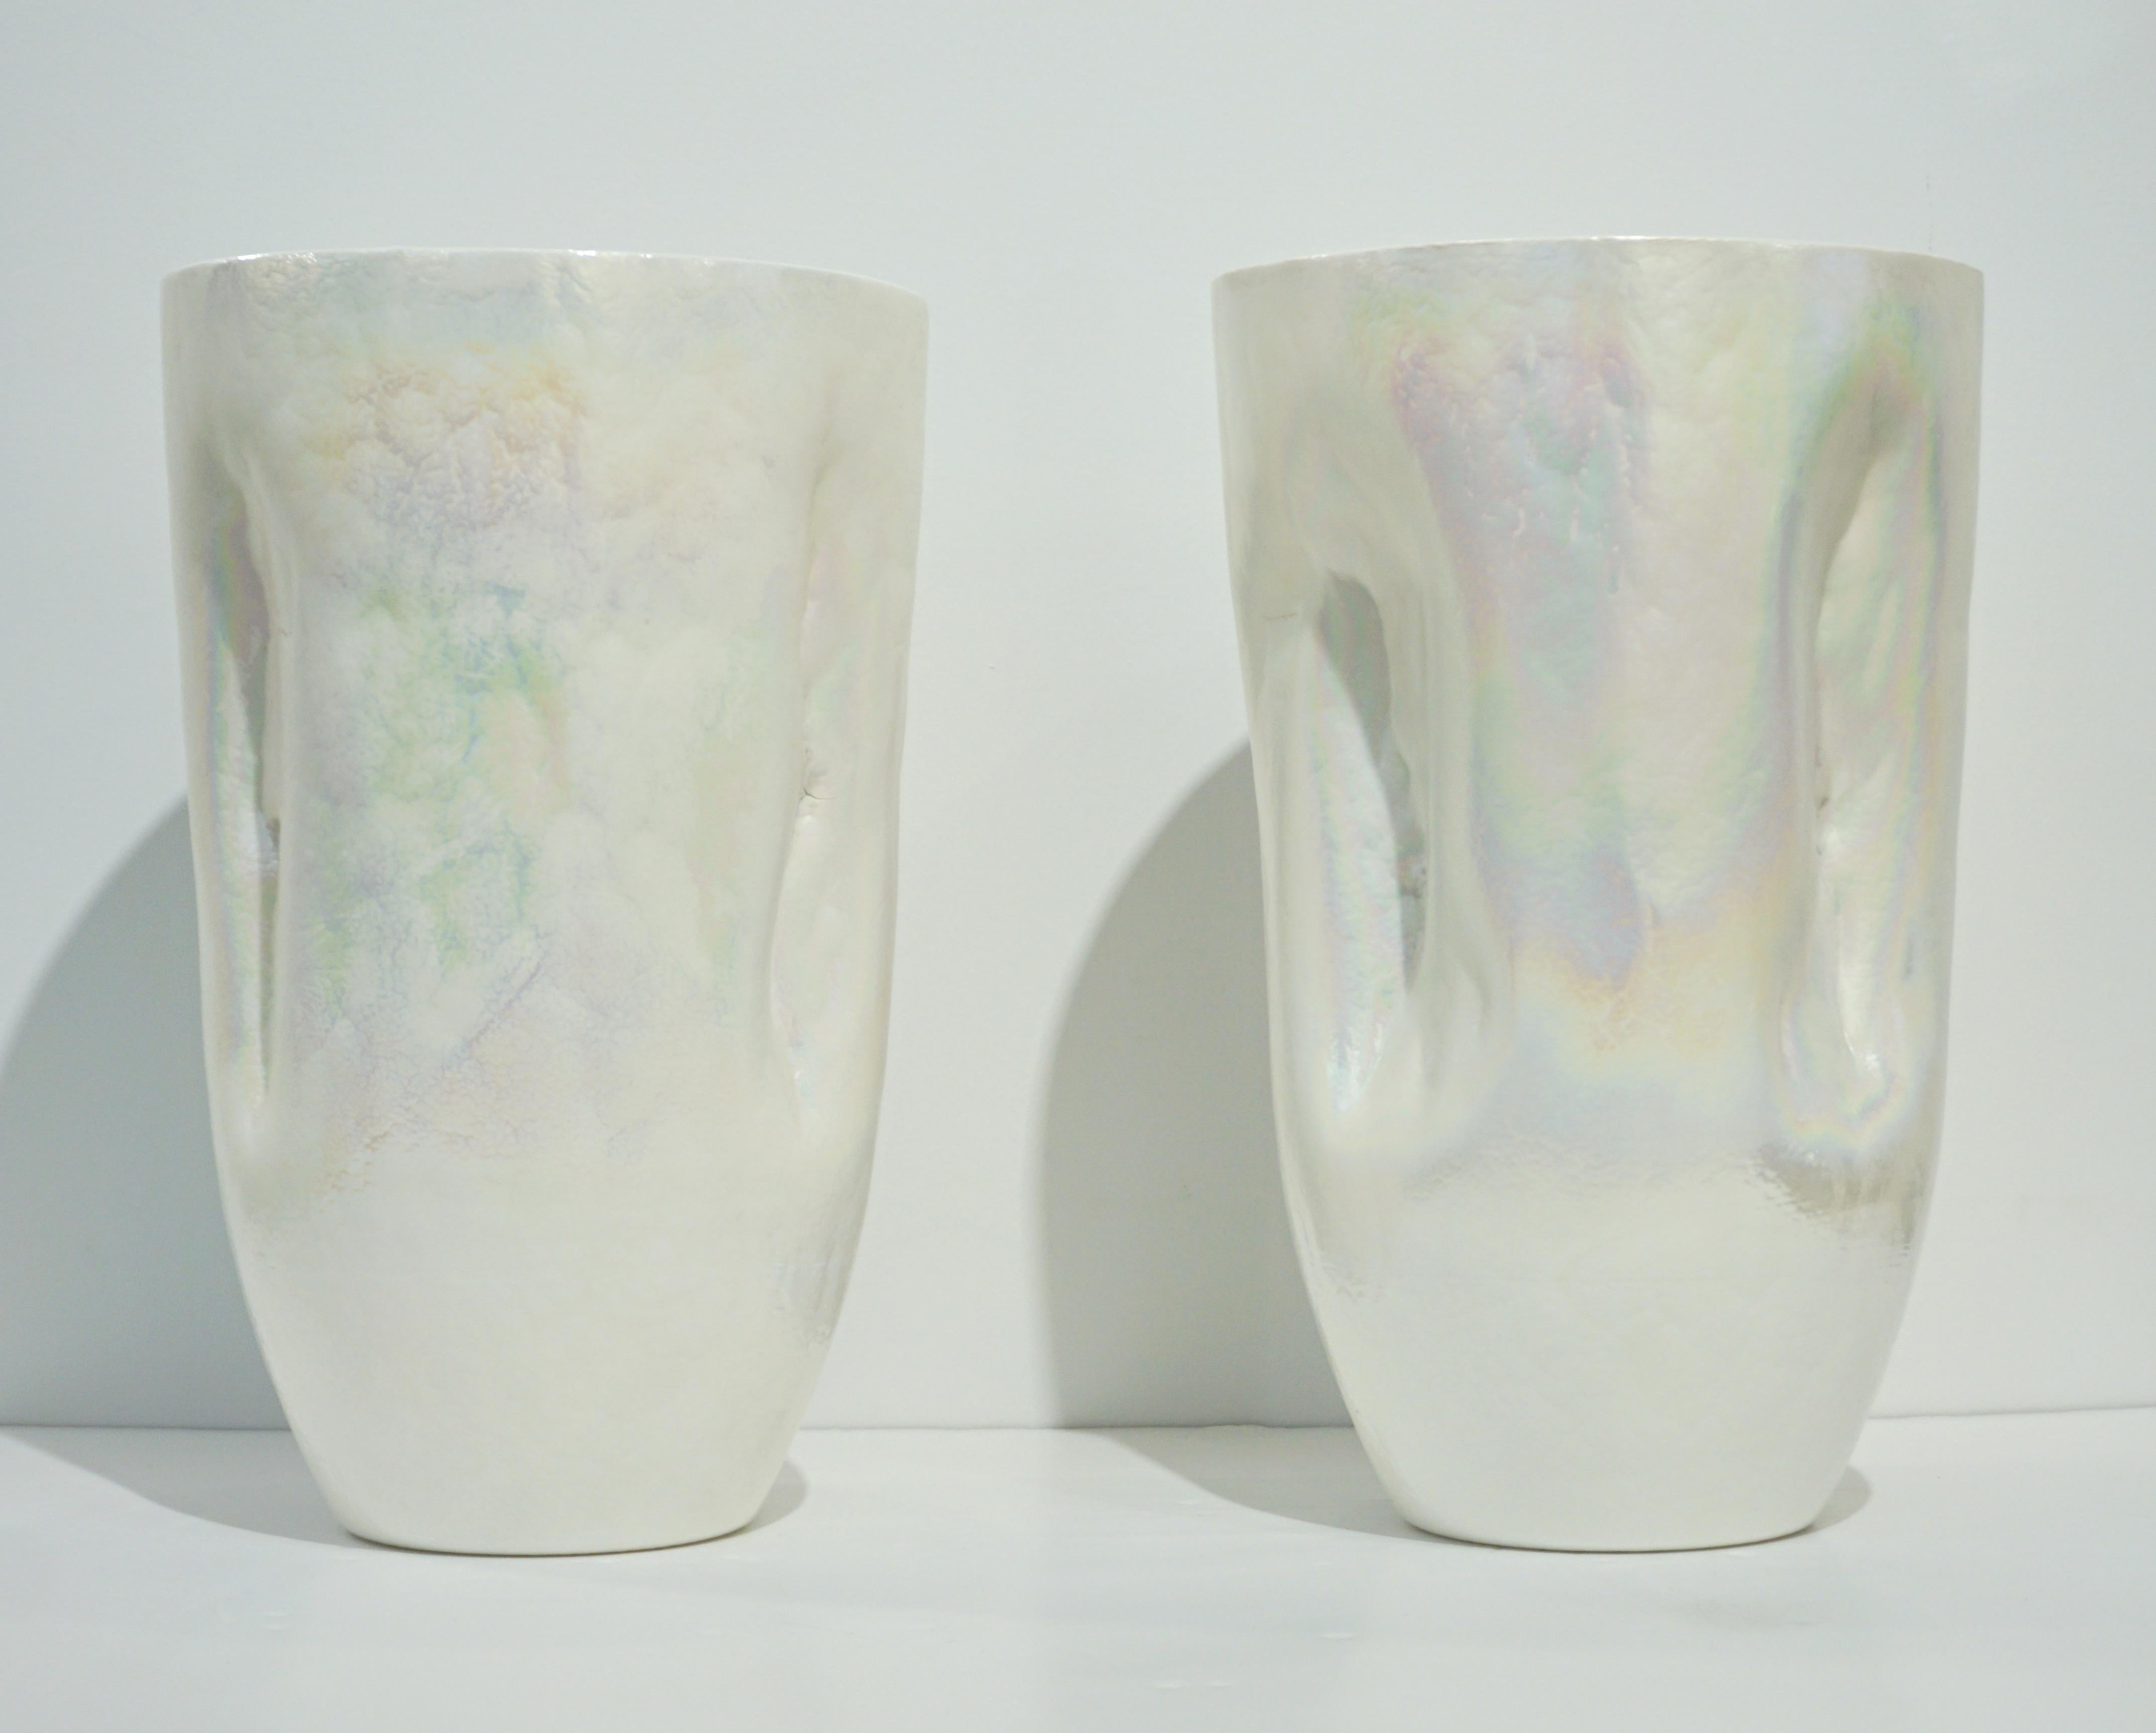 Decorative Italian pair of pearlescent white Murano glass vases of freeform with attractive interesting crumpled shape, the Venetian blown glass has a pâte de verre consistency glowing with an iridescent finish that gives it a mother of pearl